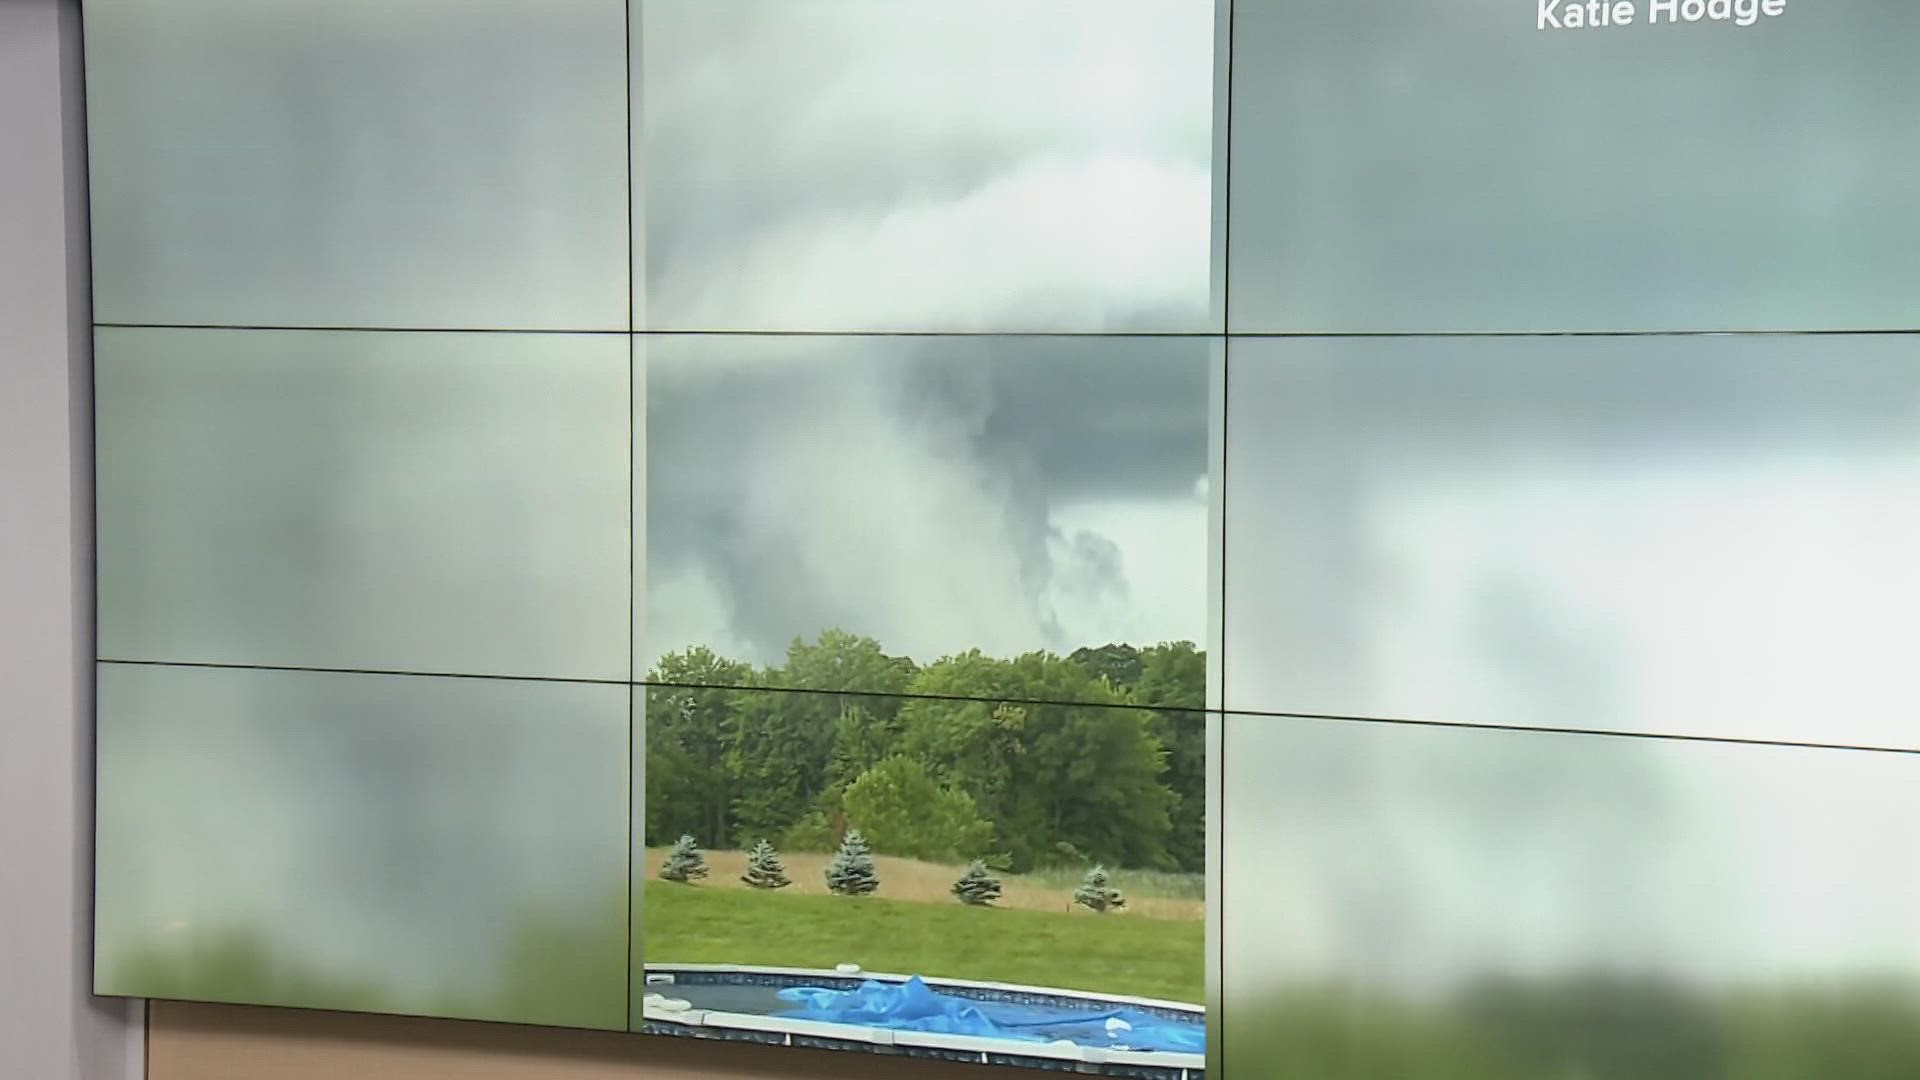 This funnel cloud was spotted in Harpersfield Township in Ashtabula County, which was under a tornado warning with Lake County at one point Sunday evening.